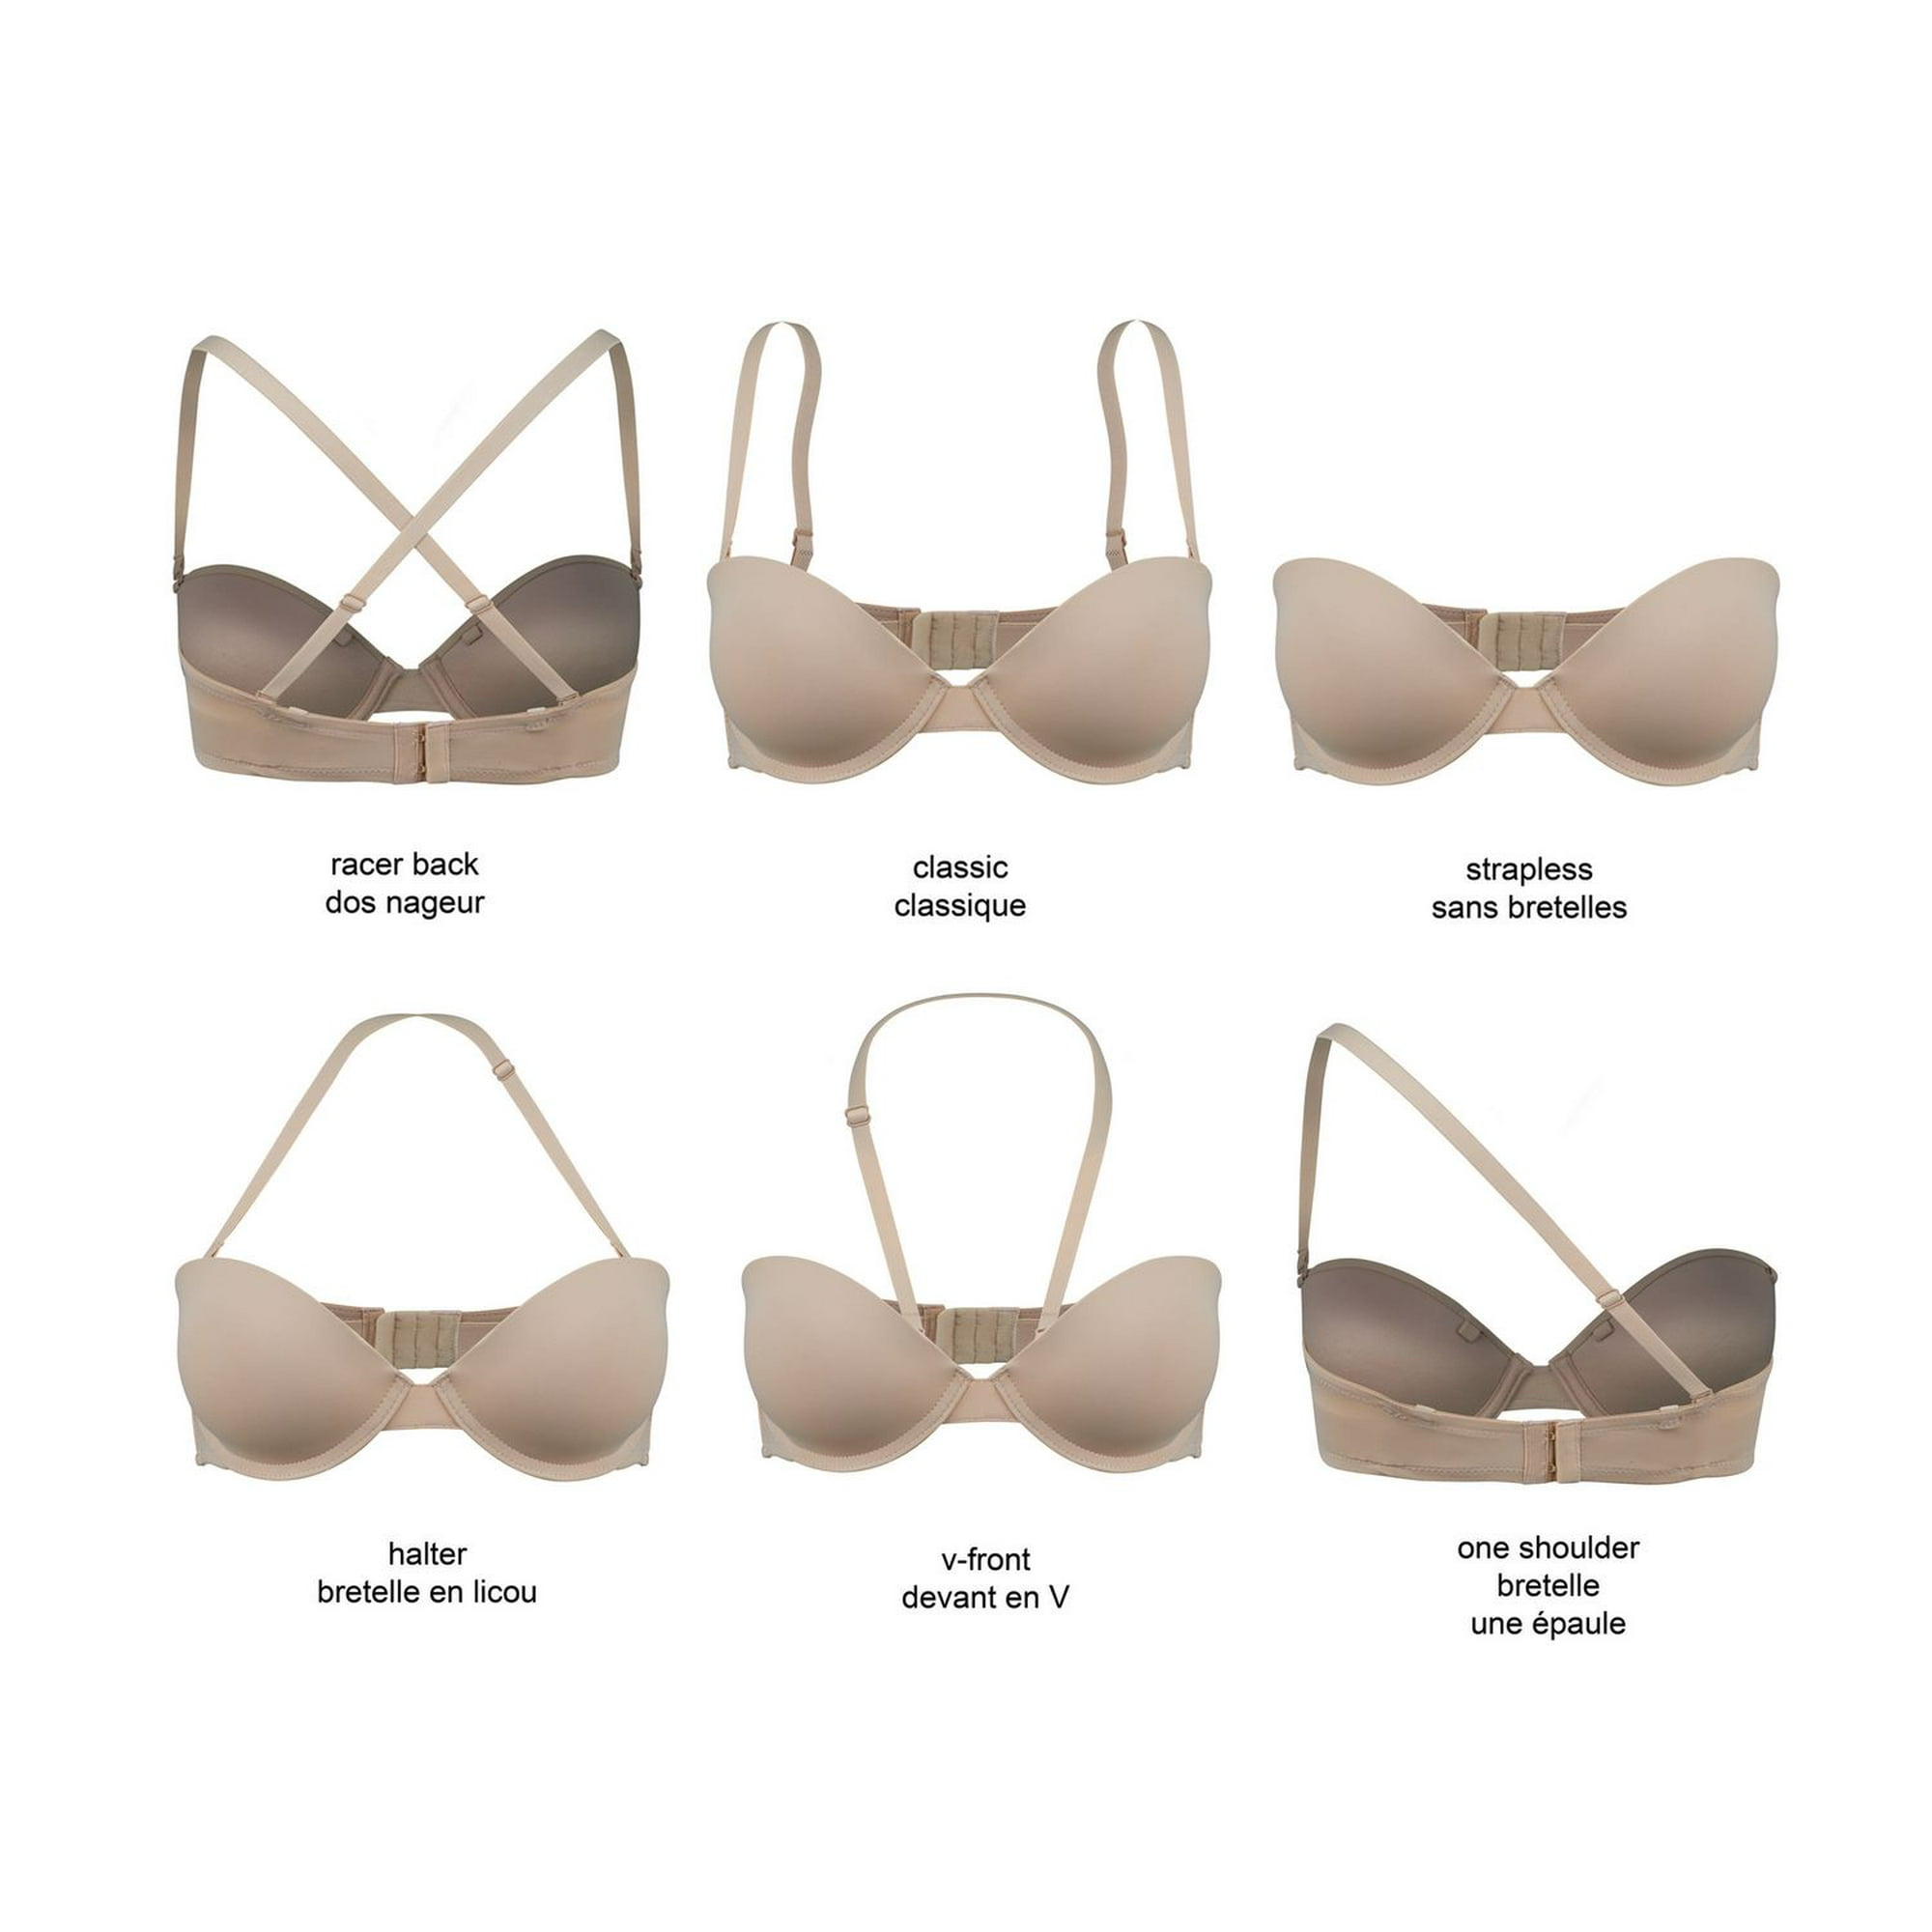 T-Shirt Bra - Buy T-Shirt Bras Online By Price, Size & Type – tagged 34C  – Page 3